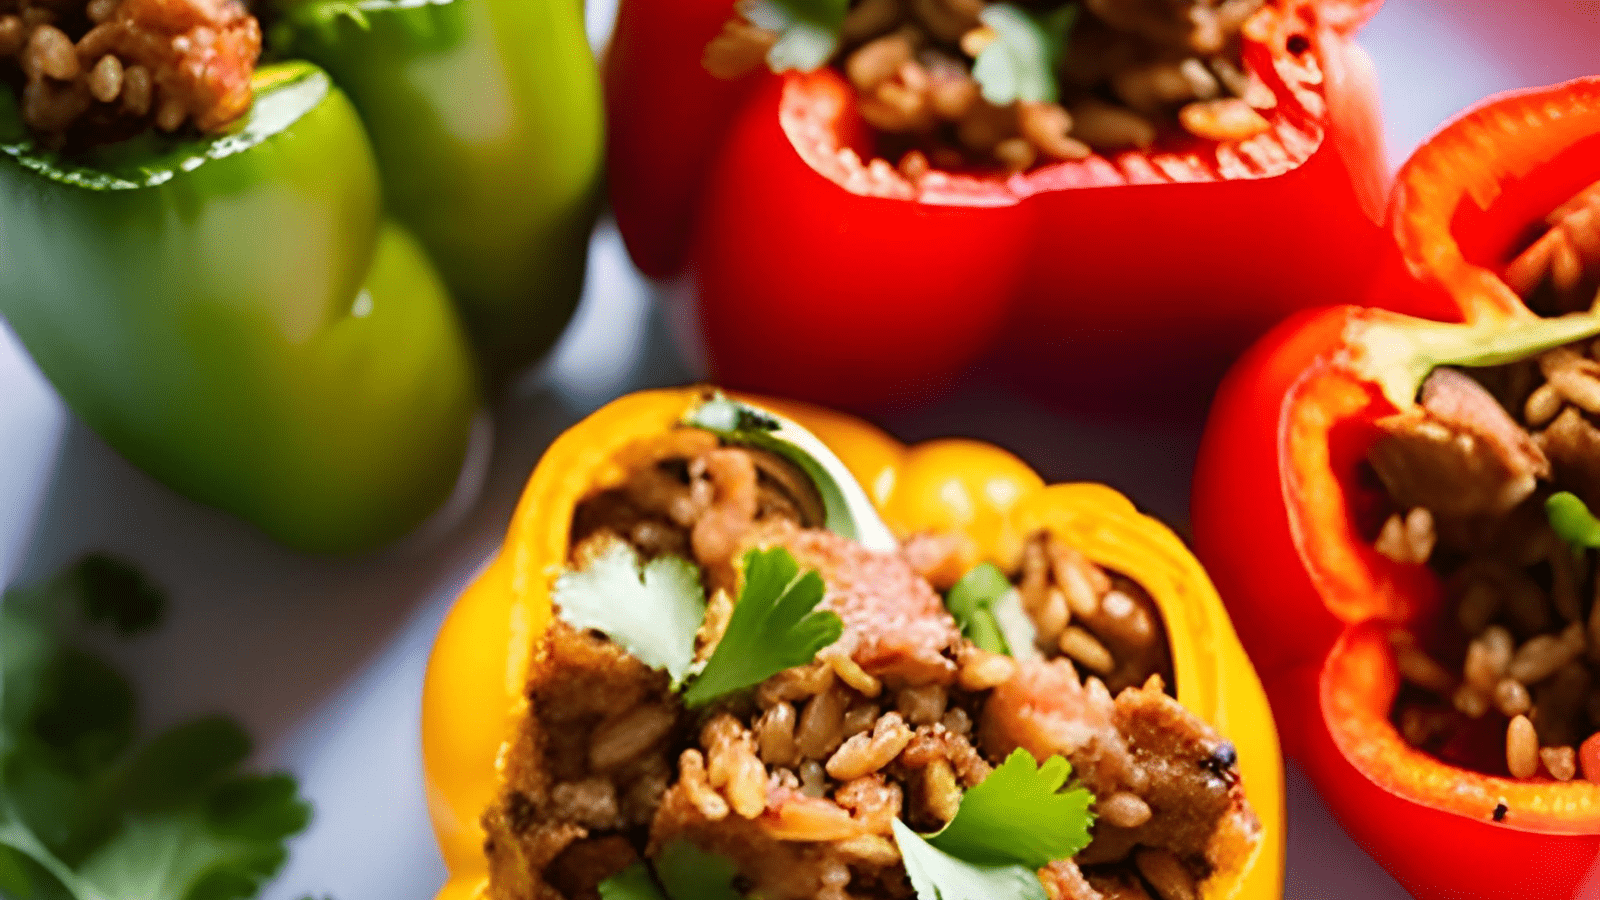 Colorful stuffed peppers with whole grain rice and parsley as garnish.